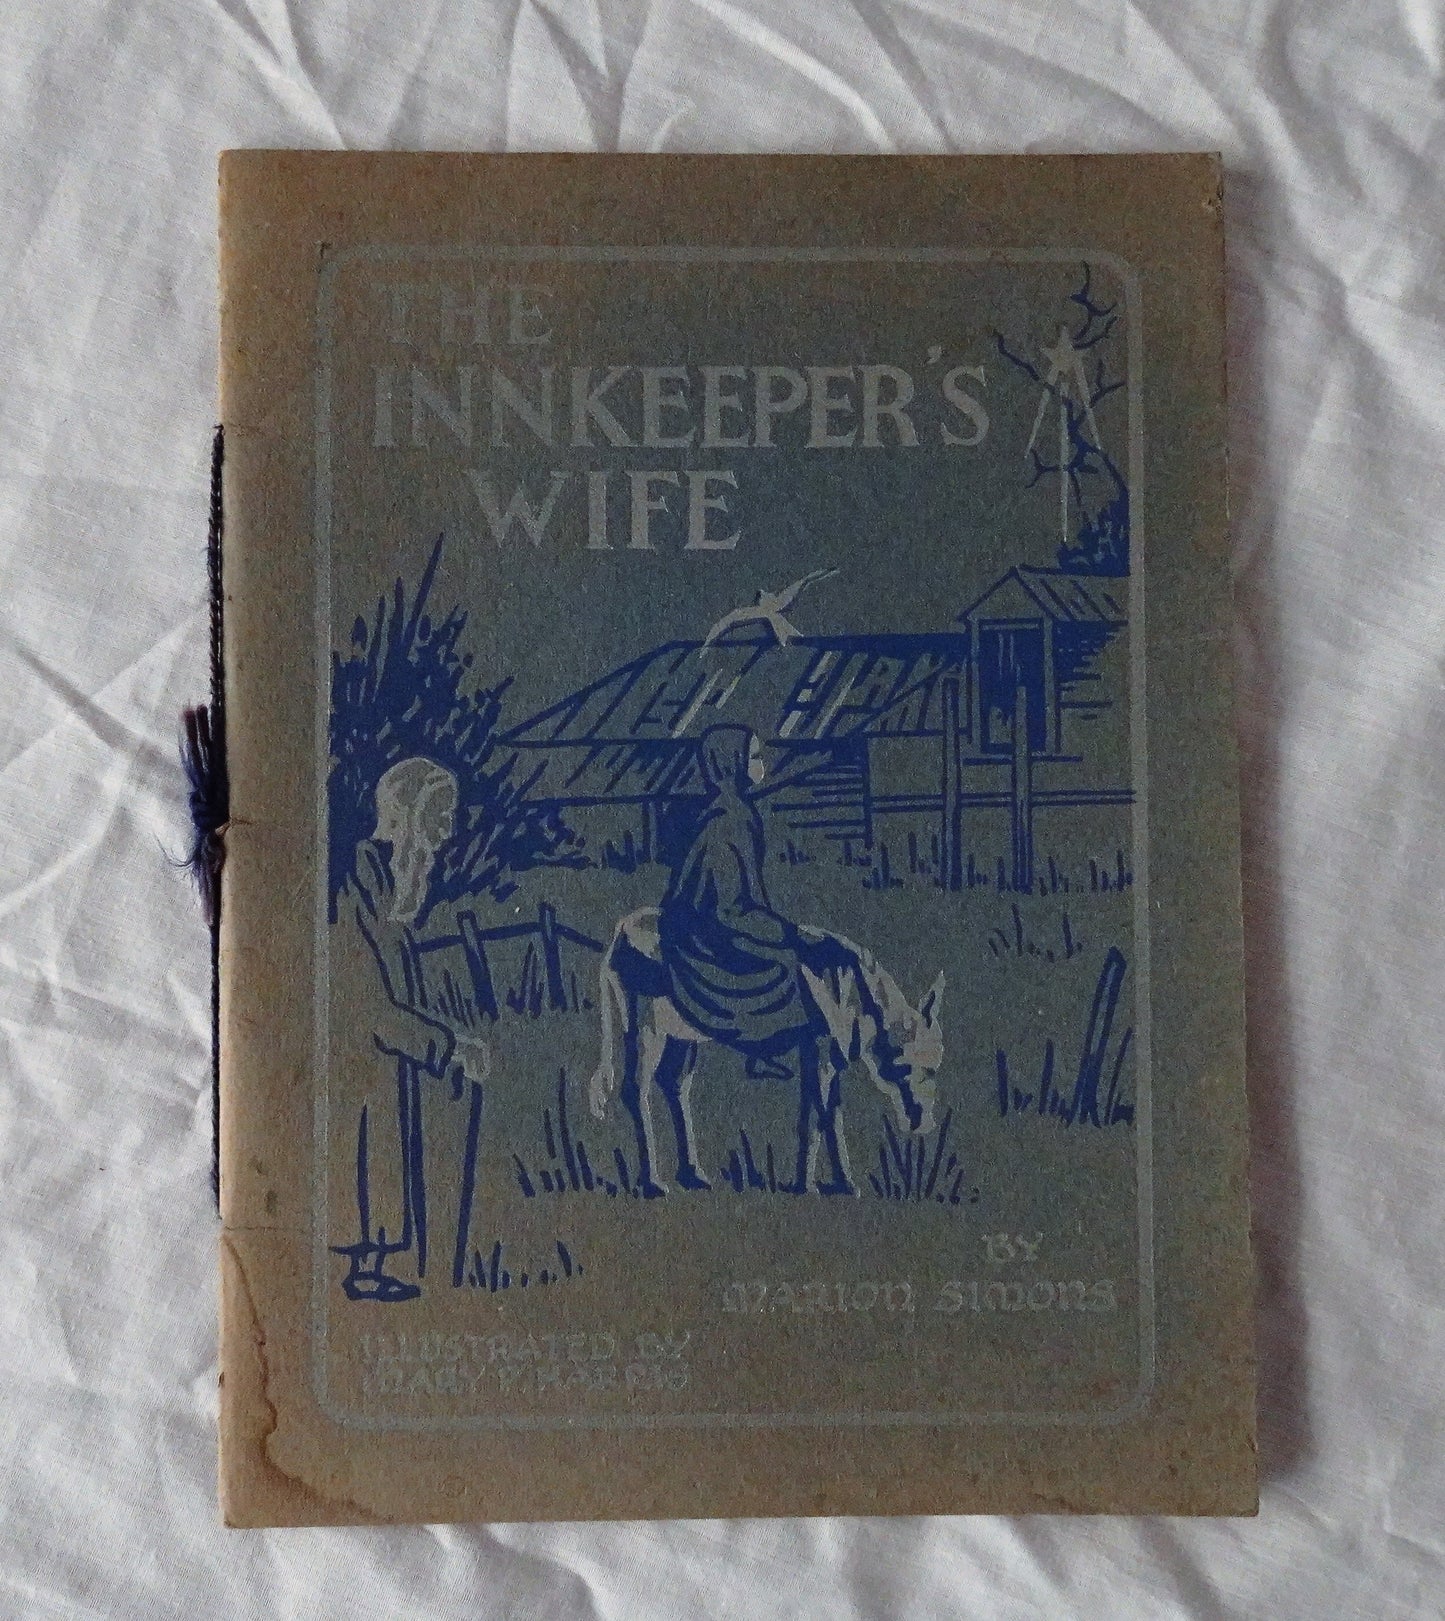 The Innkeeper’s Wife  by Marion Simons  Illustrations by Mary P. Harris